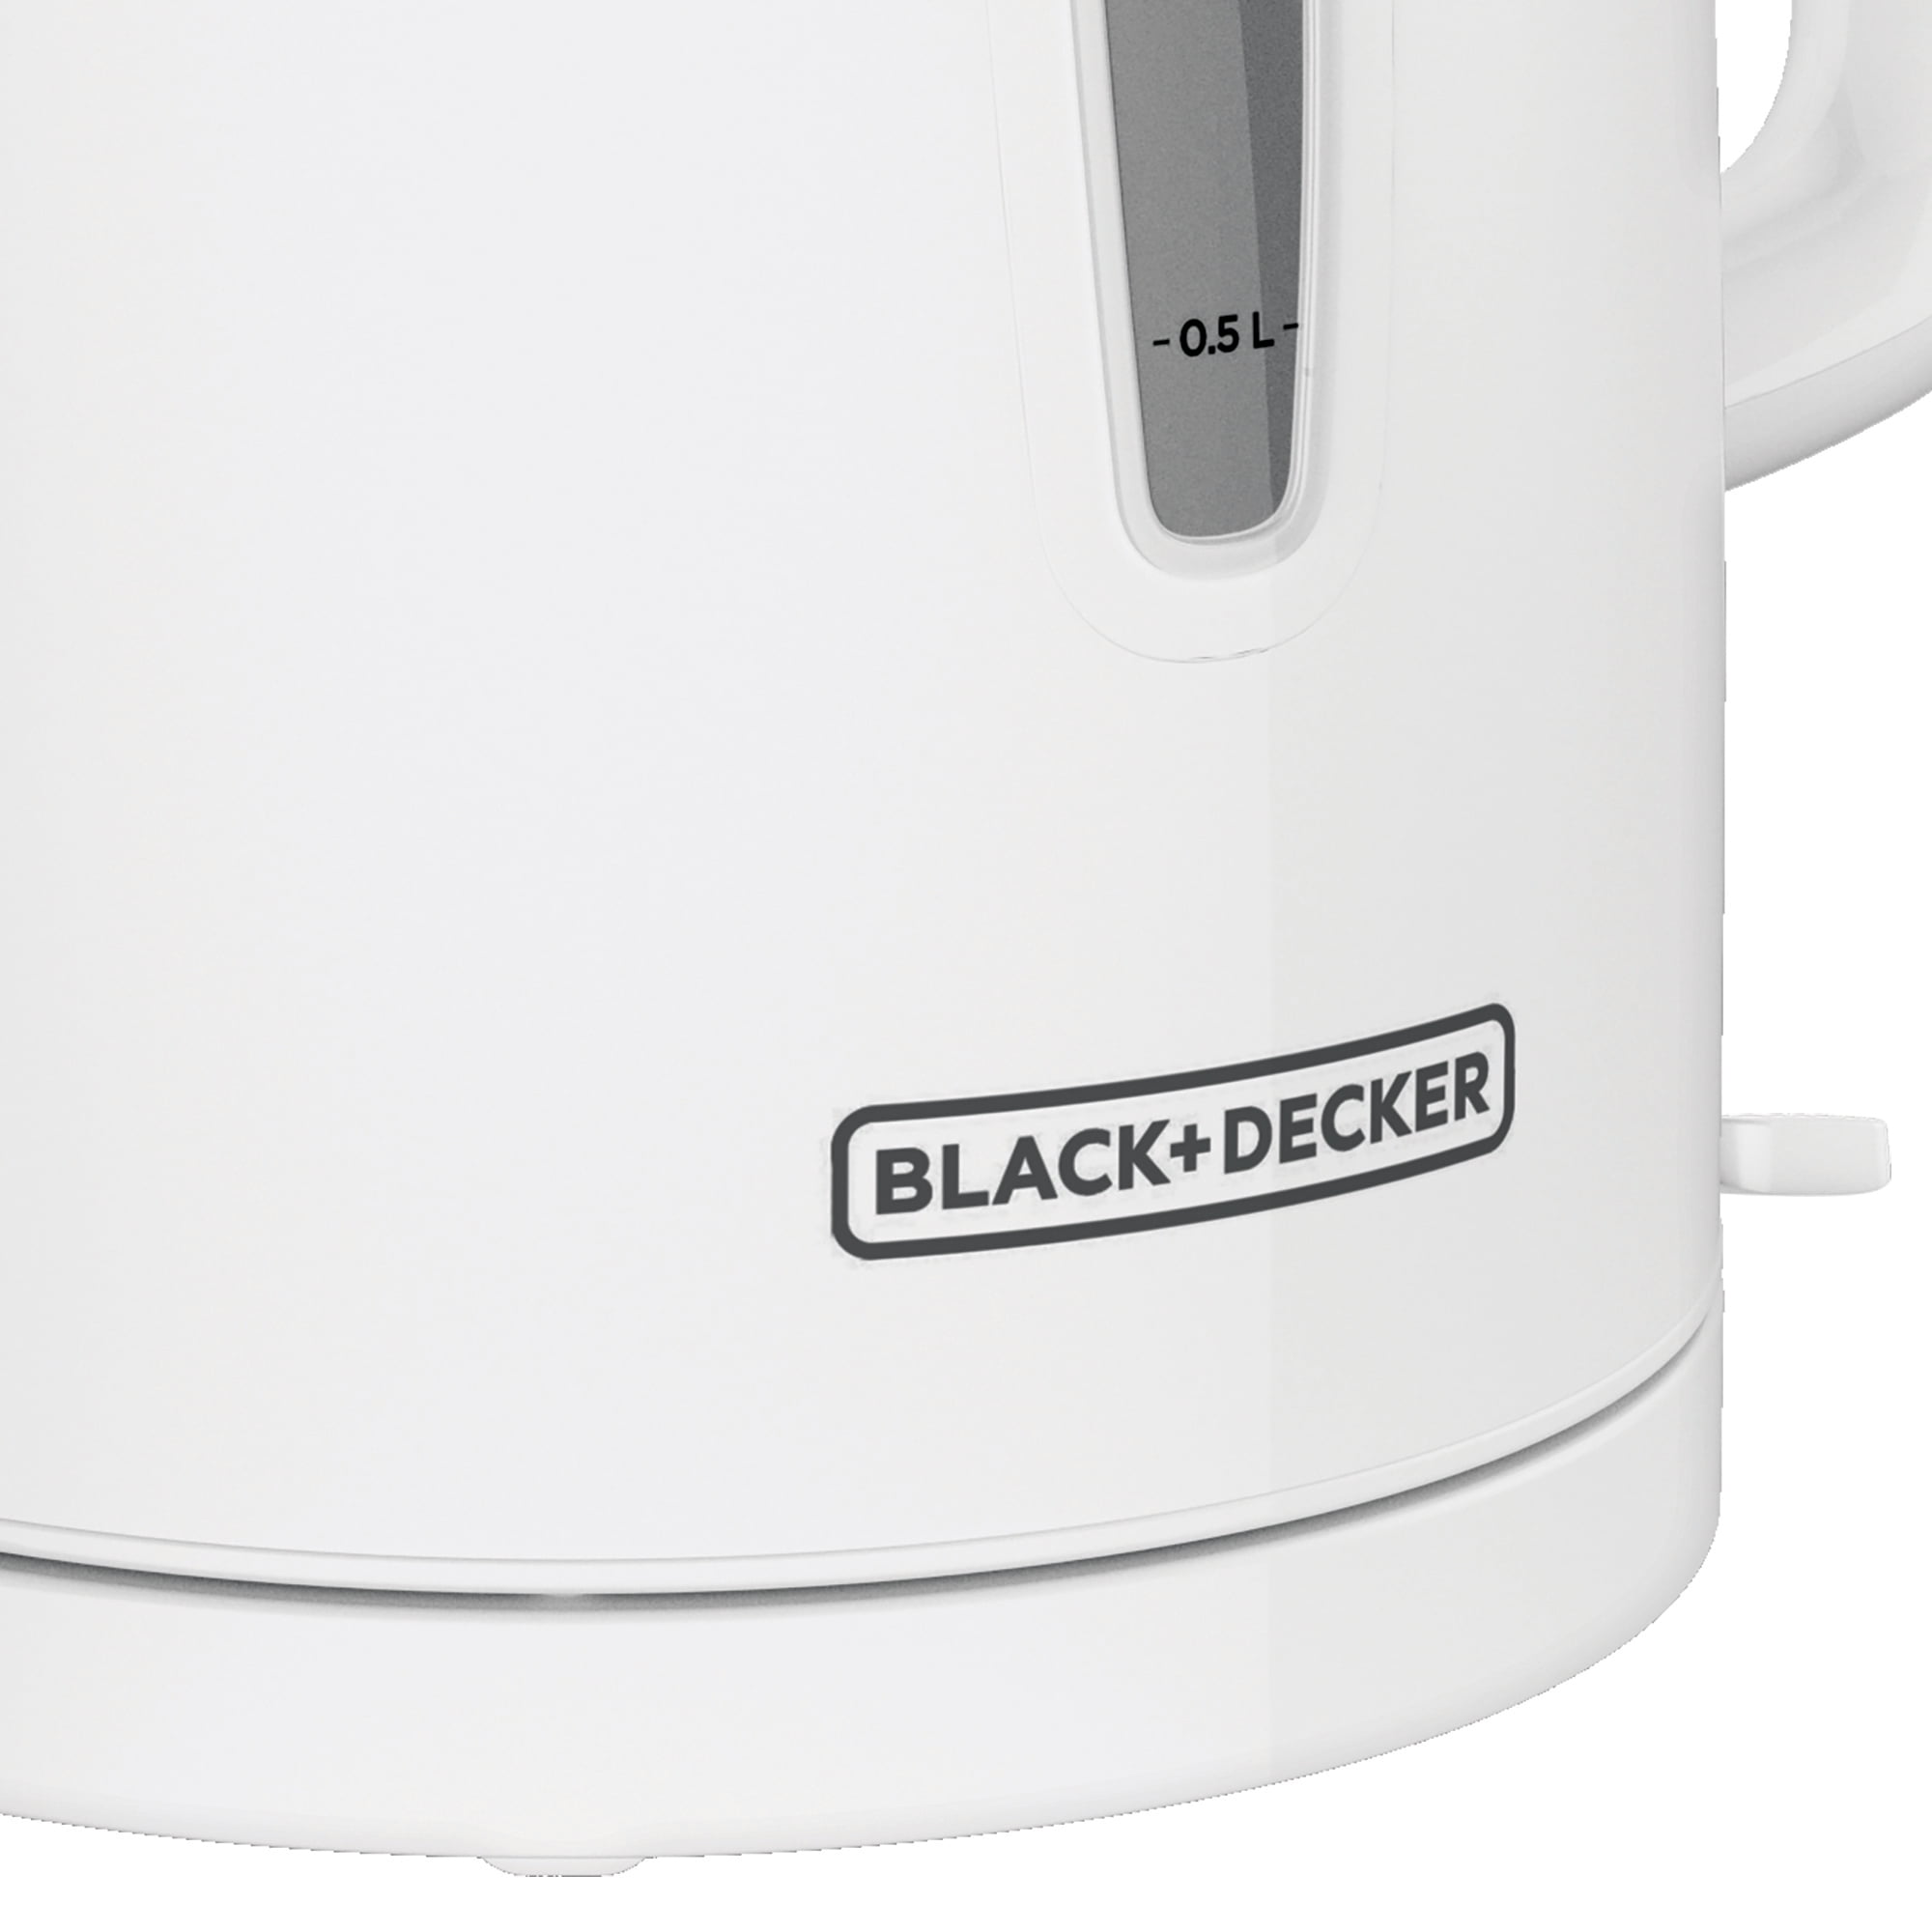 Black & Decker CK1500R Cordless Electric Dome Kettle, Red